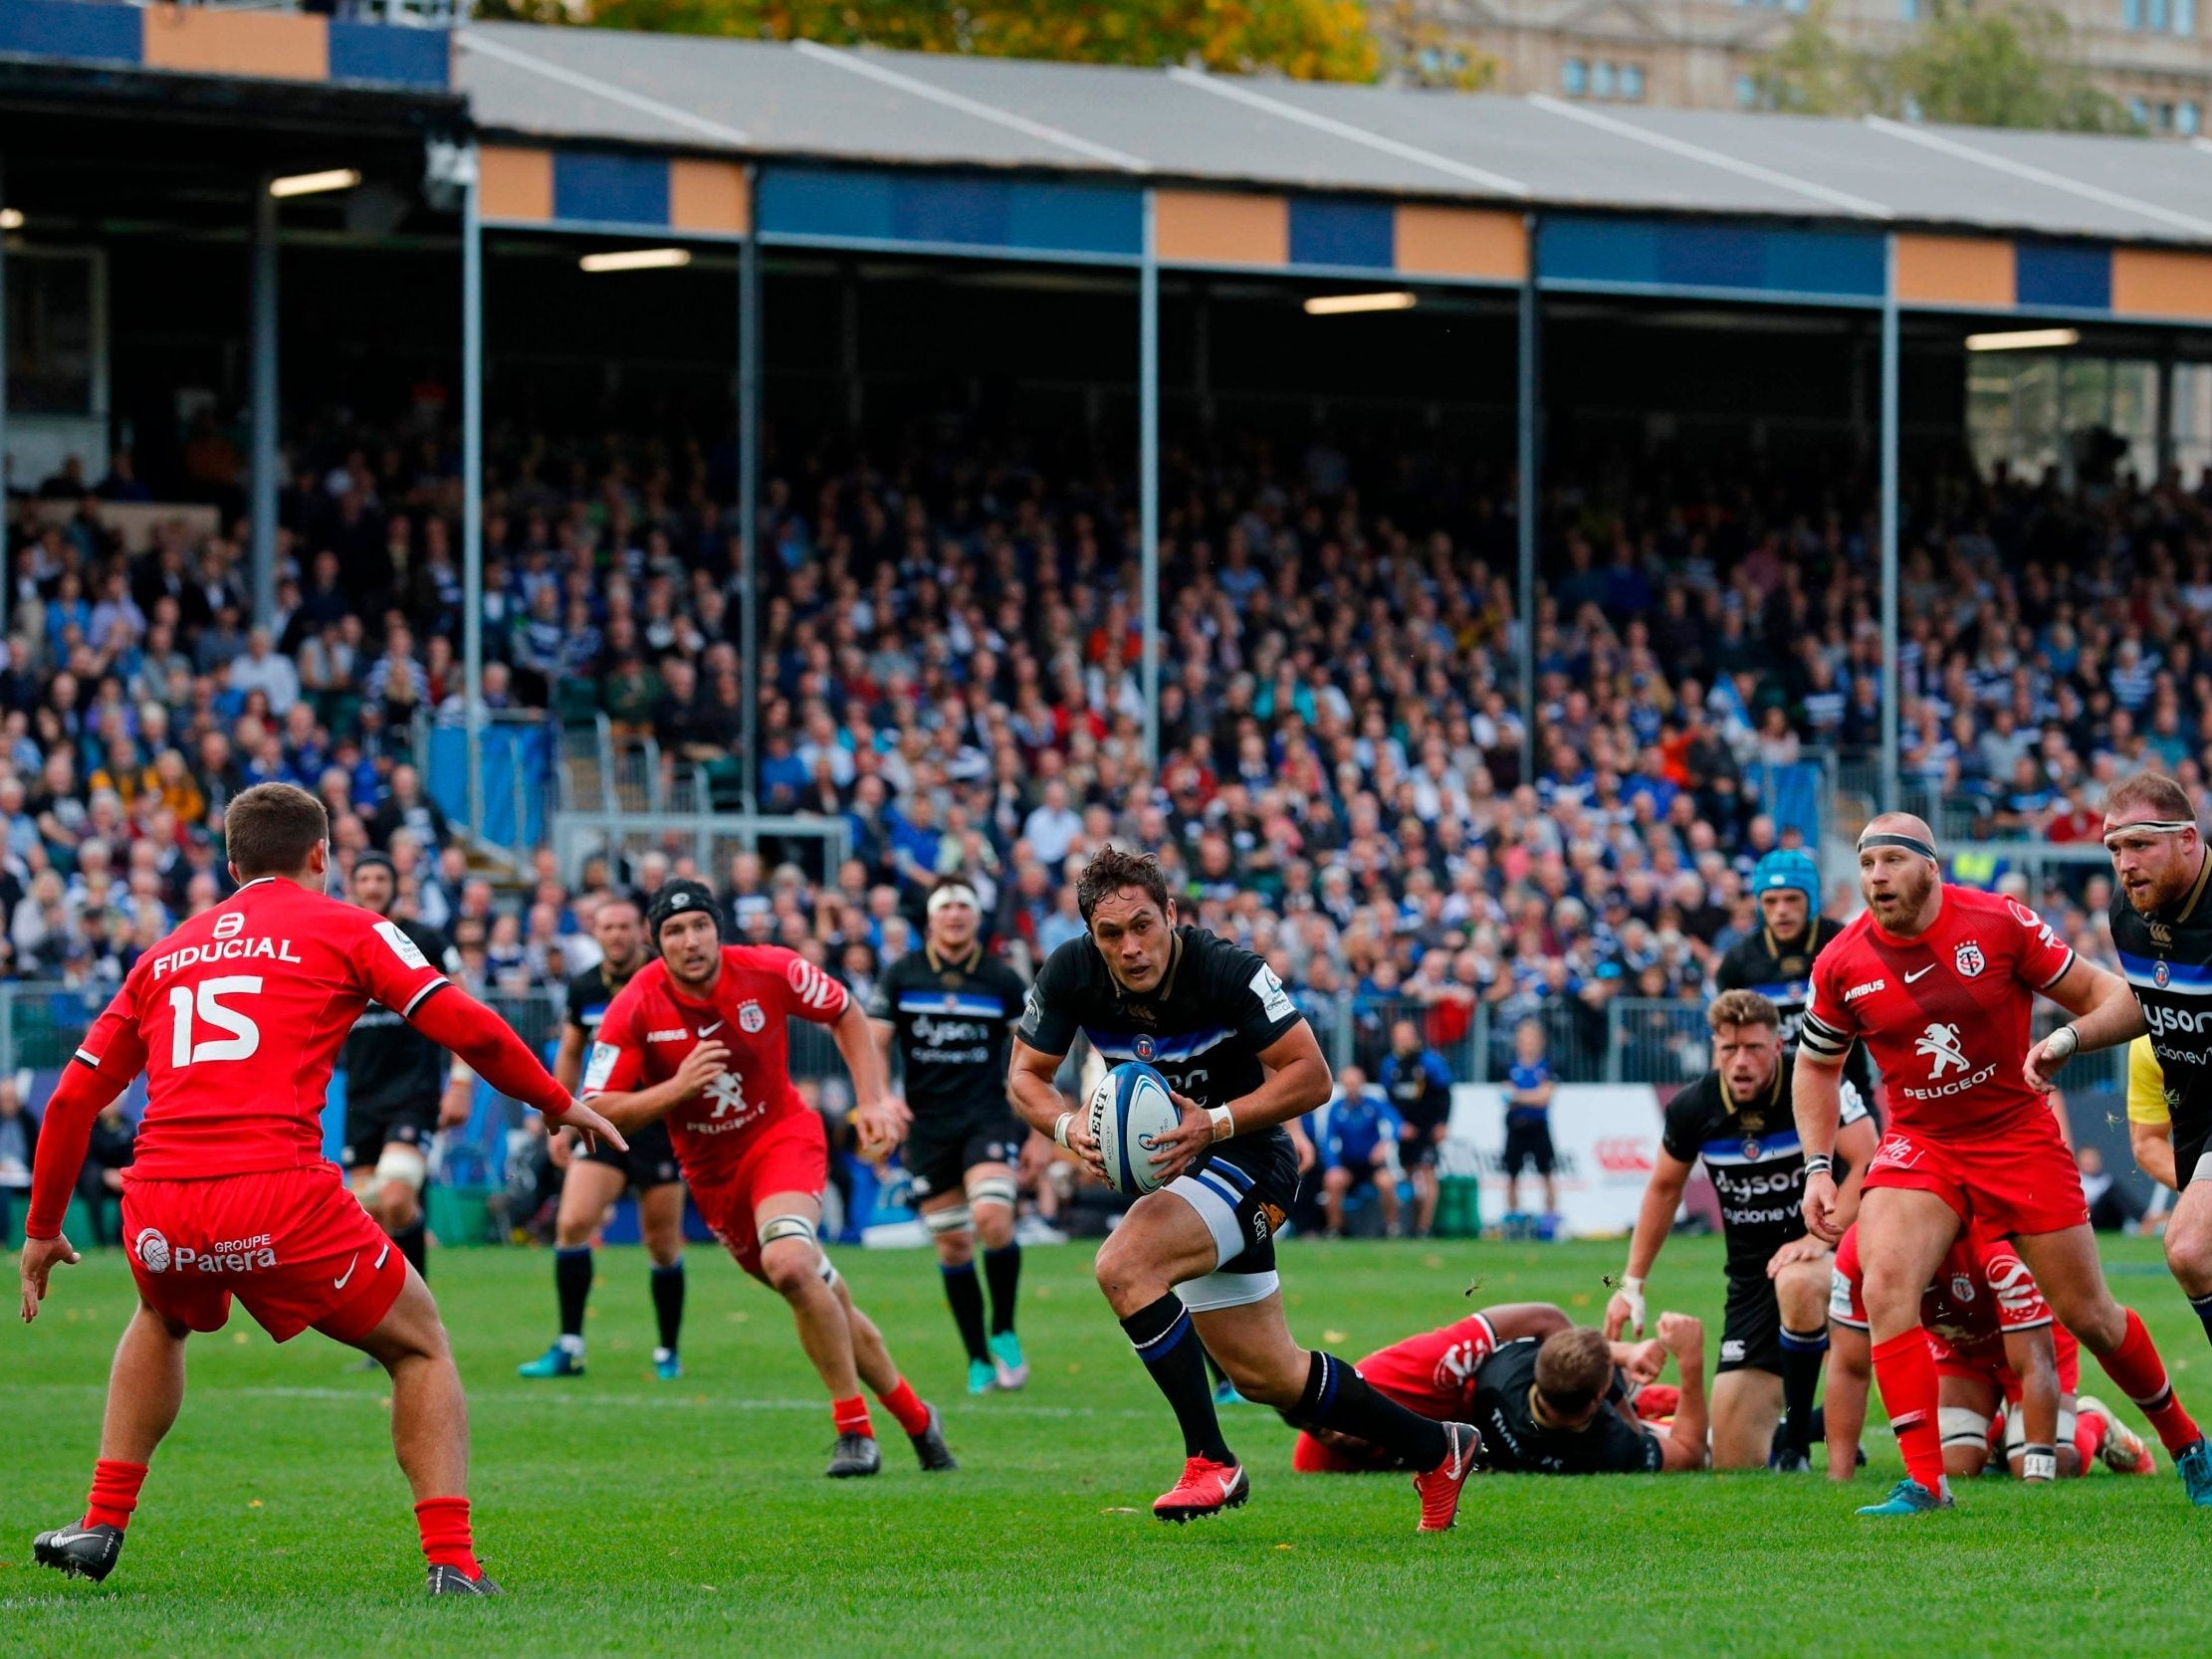 Bath lost 22-20 to Toulouse in a dramatic match